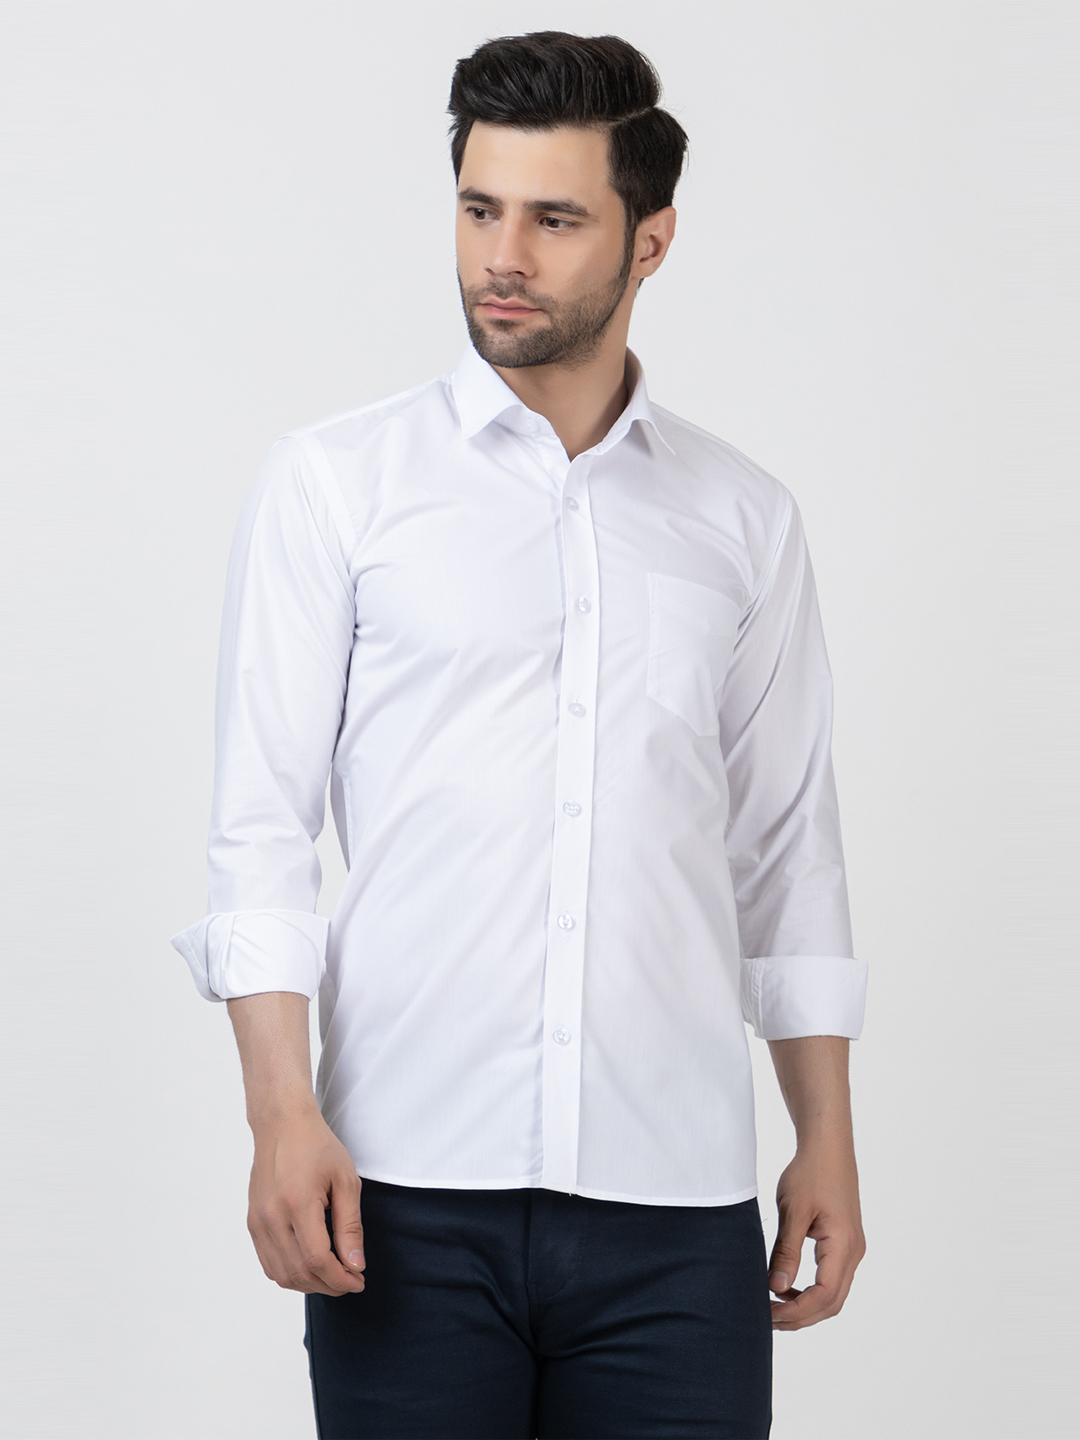 Buy White Shirt for Men Online In India - ExperianceClothing